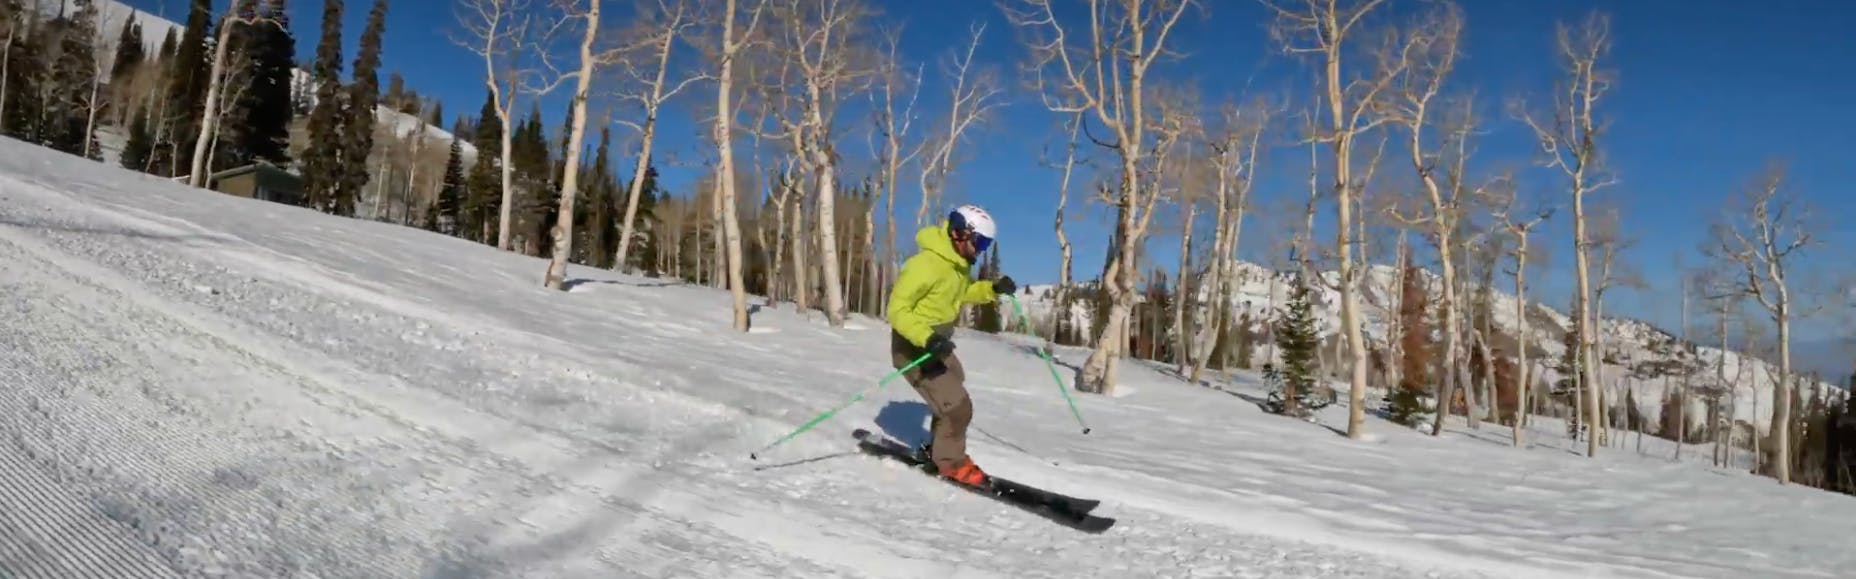 Expert Salomon Stance 96 Skis [with Video] | Curated.com